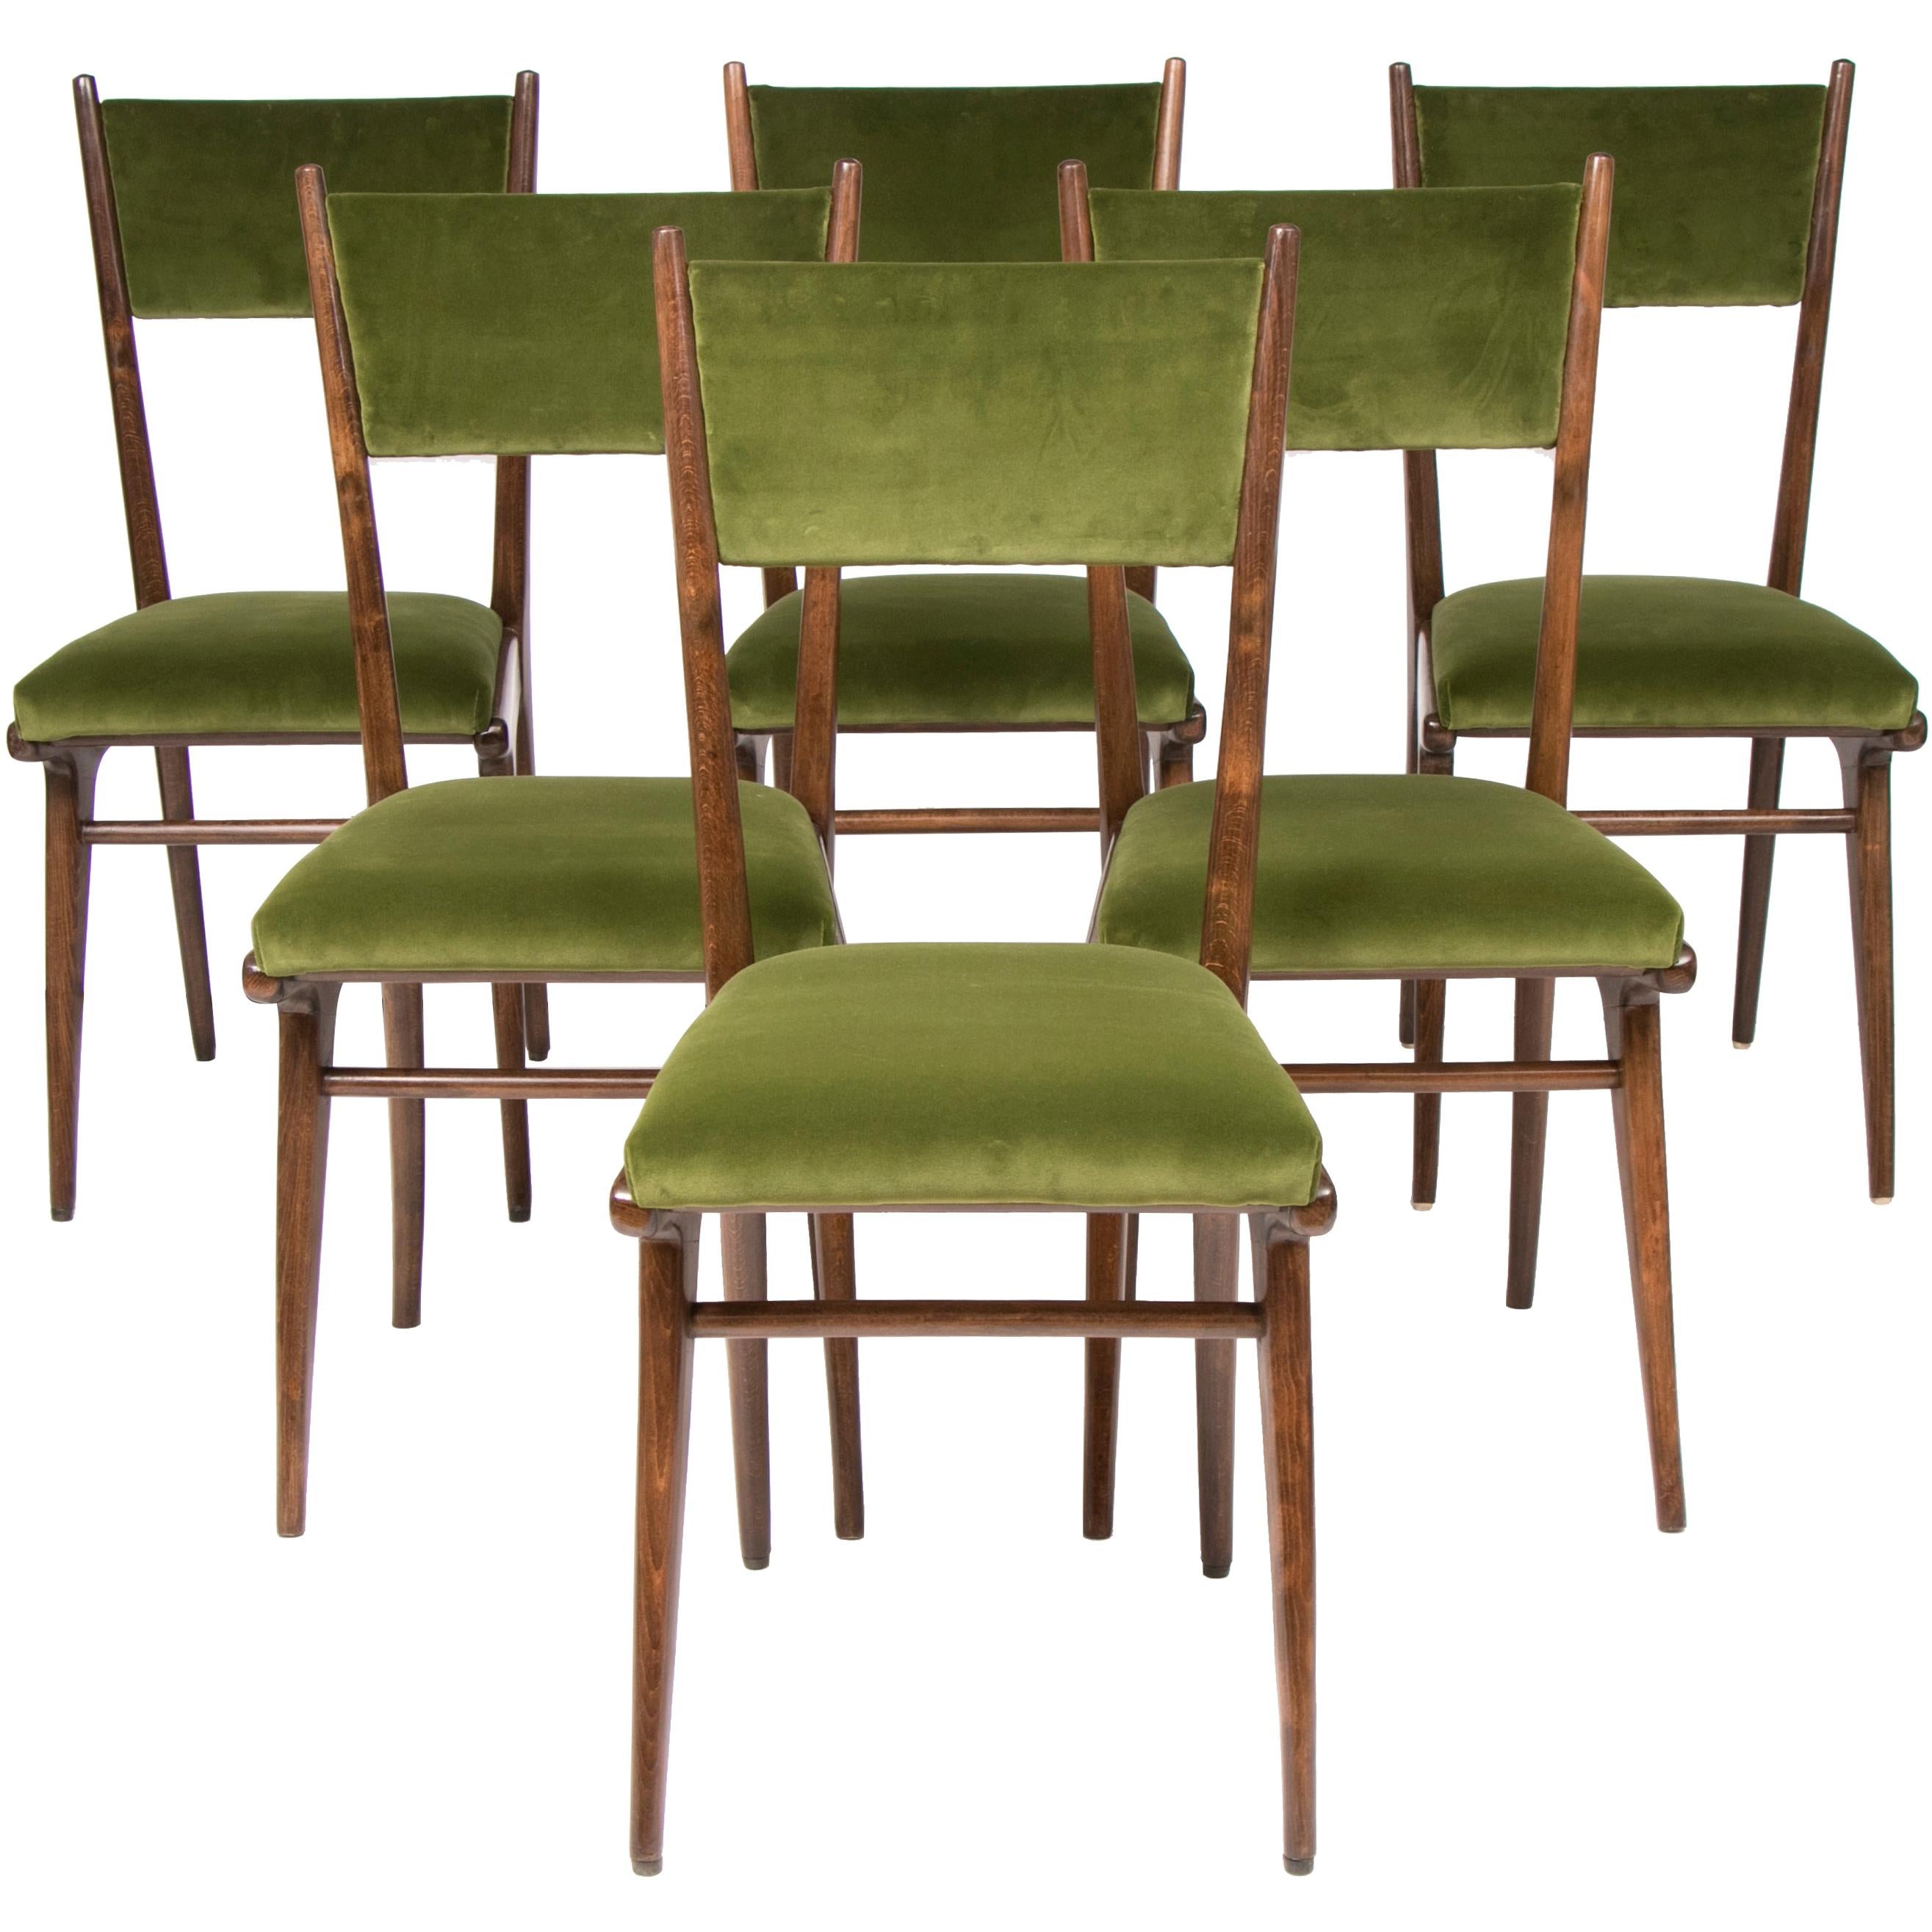 Set of 6 Italian 1950s Ico Parisi High Back Sculptural Dining Chairs